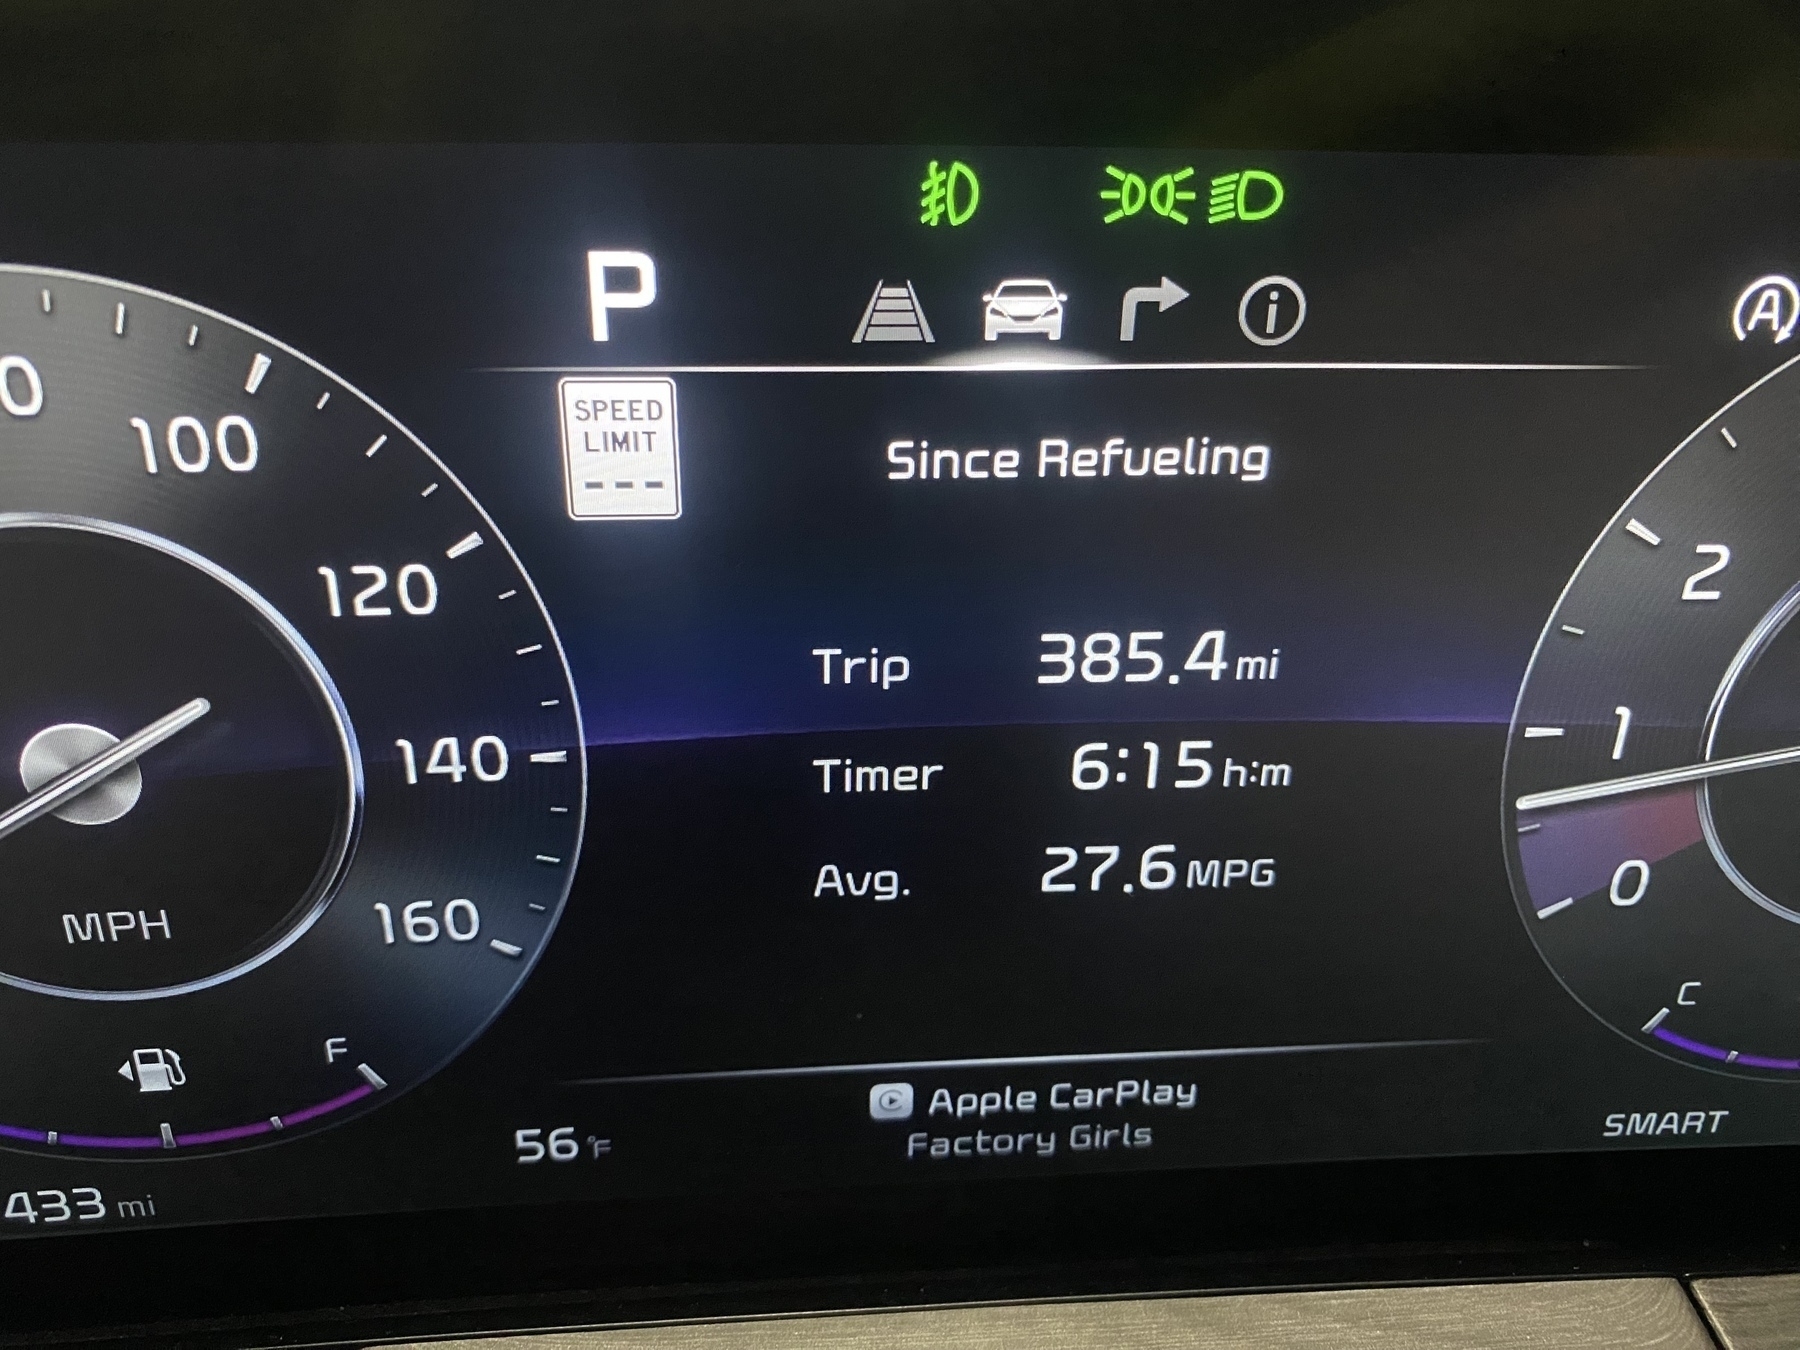 The dashboard trip meter of a Kia Telluride showing 27.6MPG.